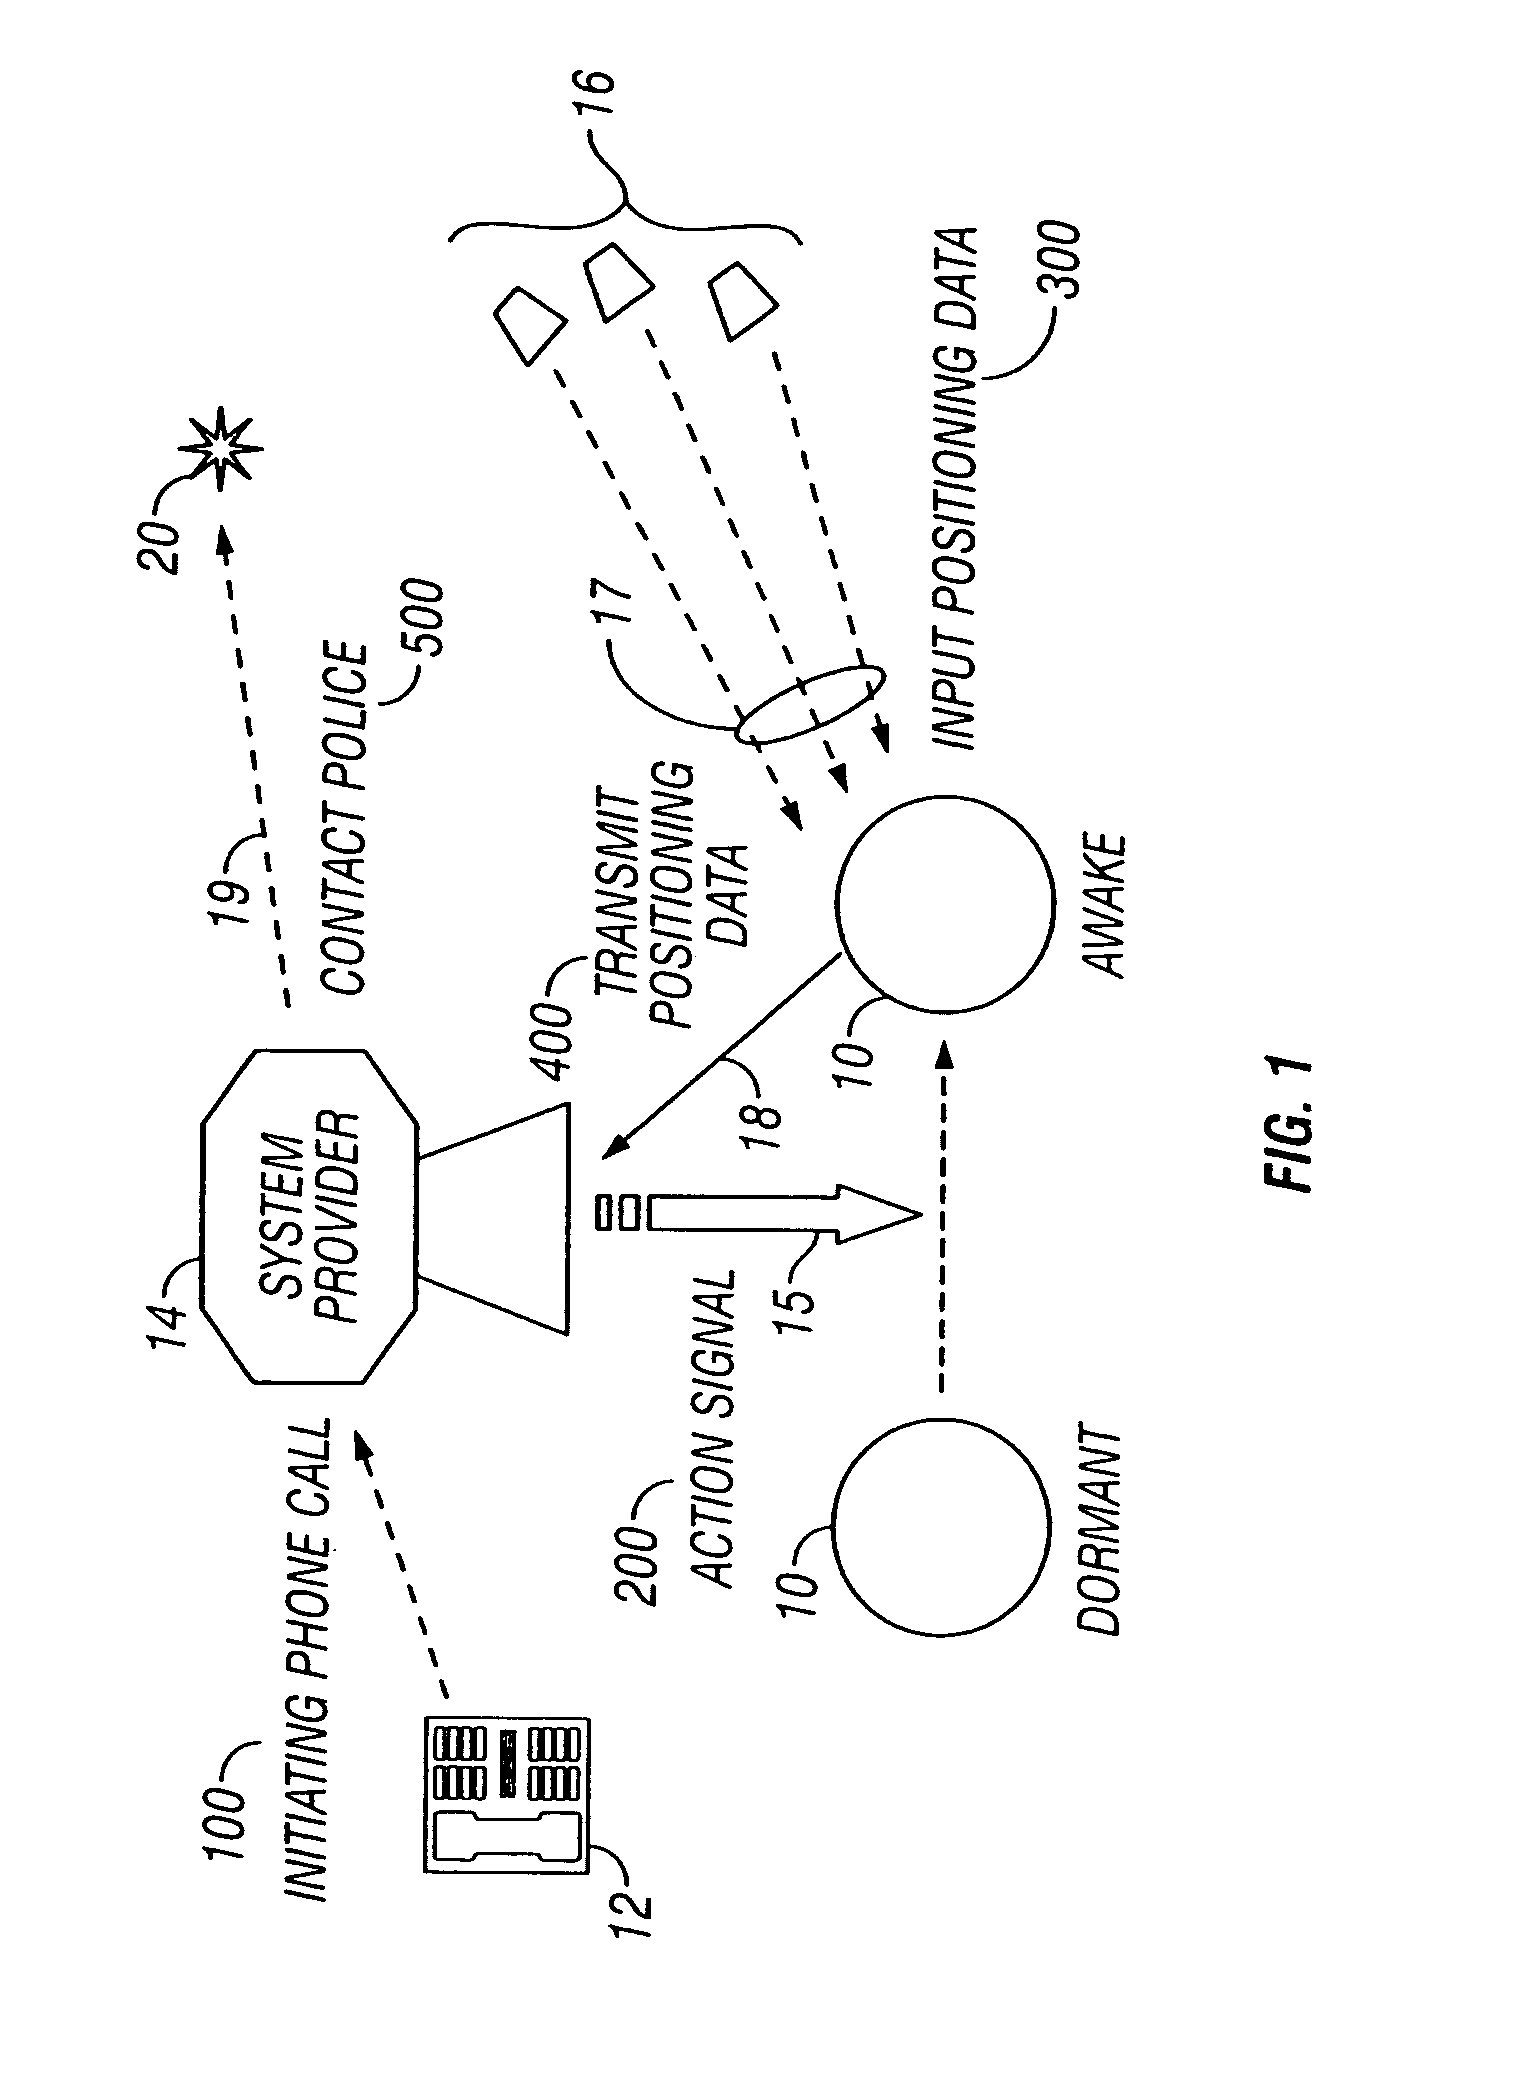 Method and apparatus for locating and tracking persons